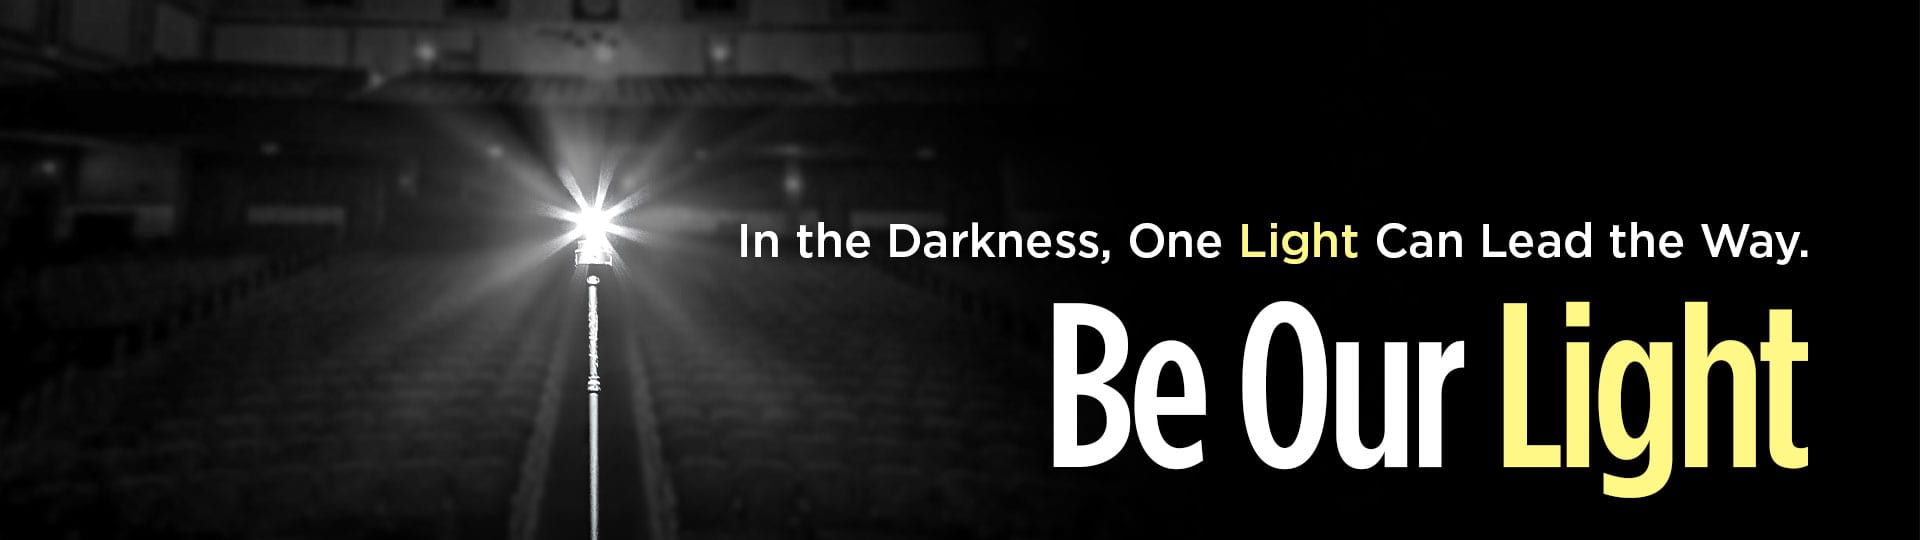 Be Our Light Banner